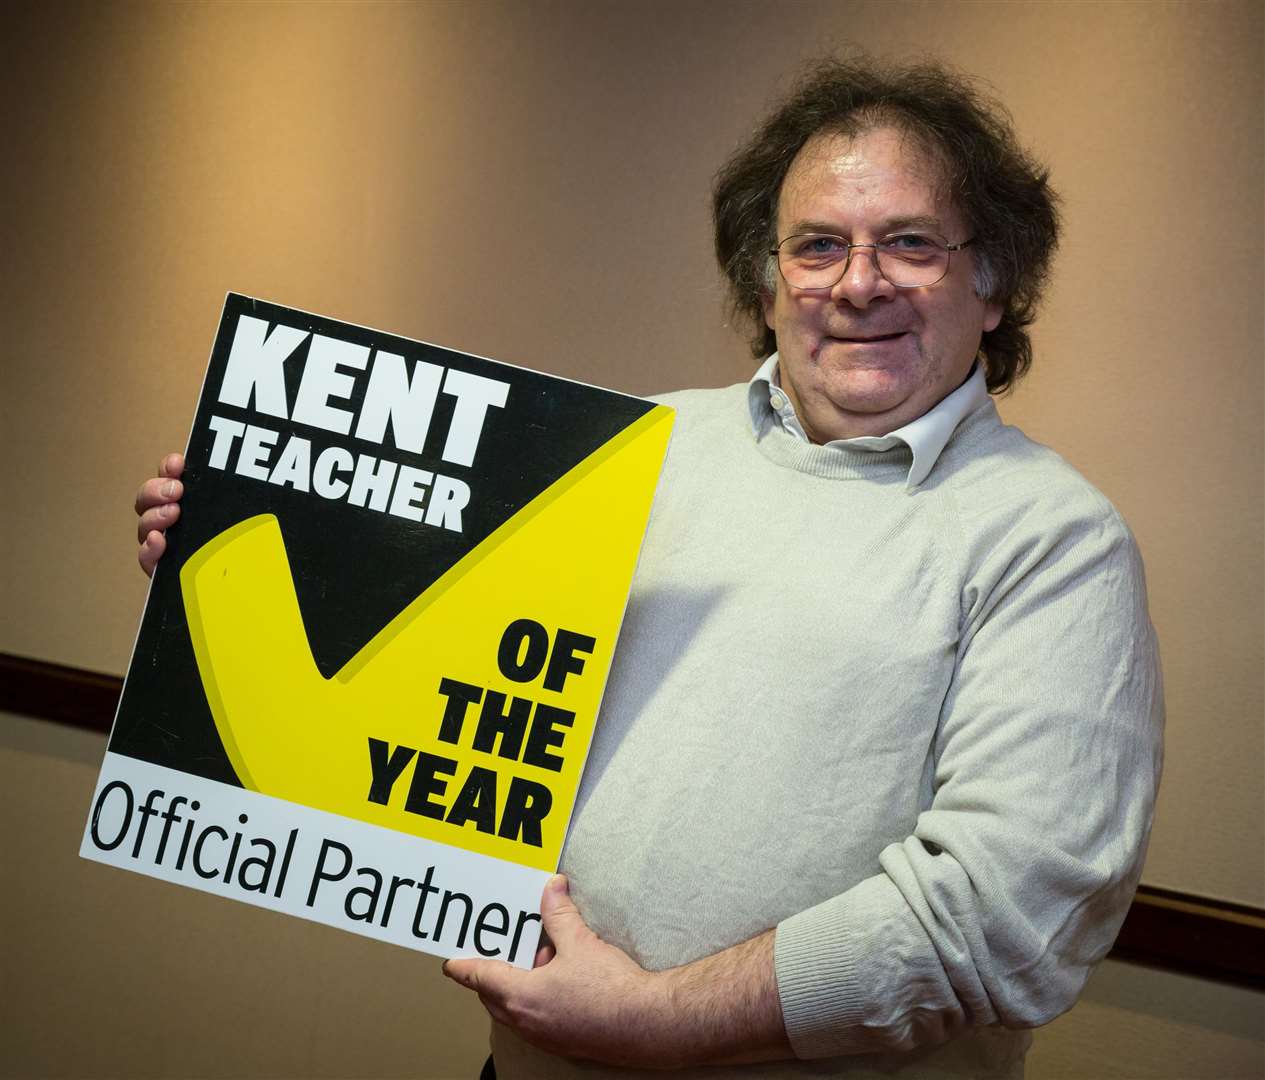 Richard Langshaw of Loop CR is on the judging panel for the Kent Teacher of the Year Awards.